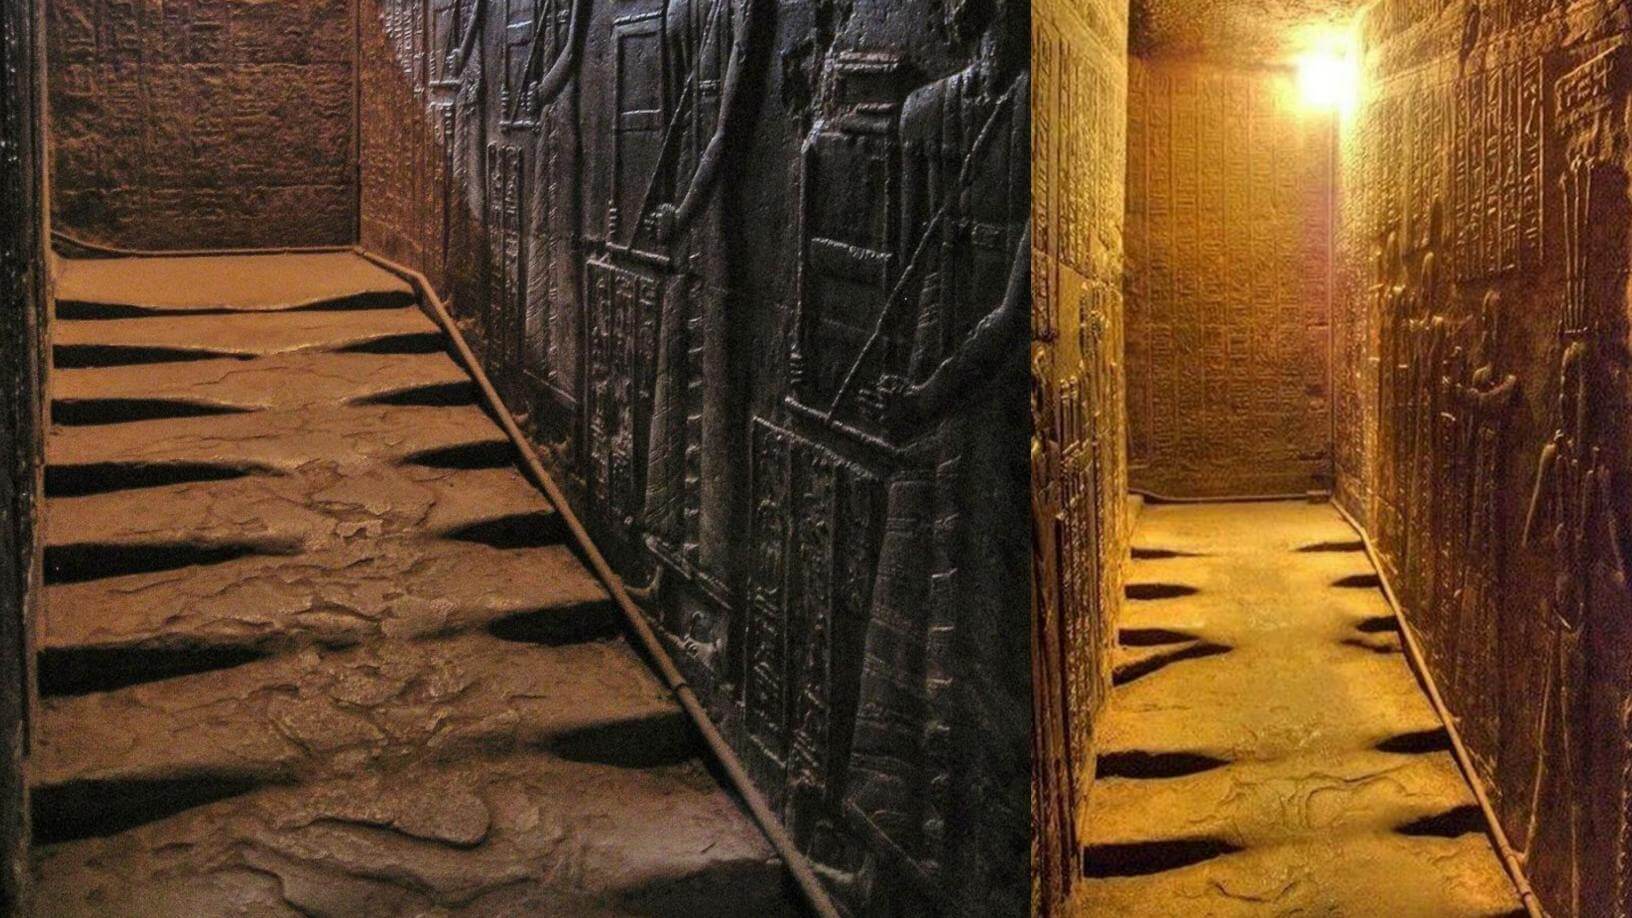 The Melted Staircase of the Temple of Hathor